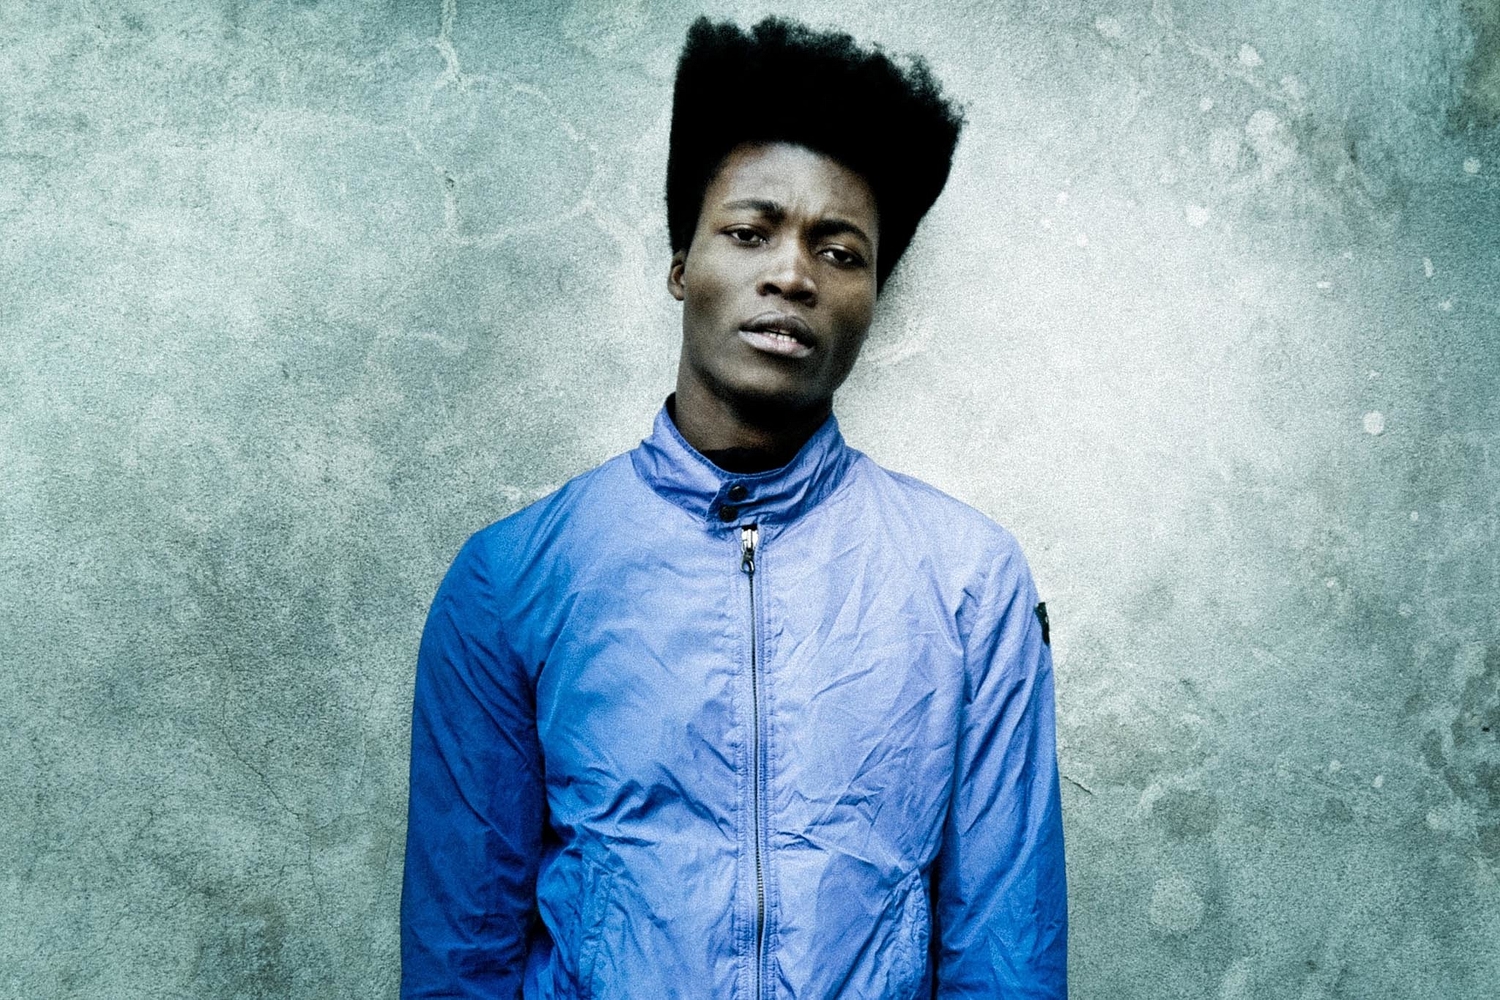 Benjamin Clementine is the favourite to win tonight’s Mercury Prize